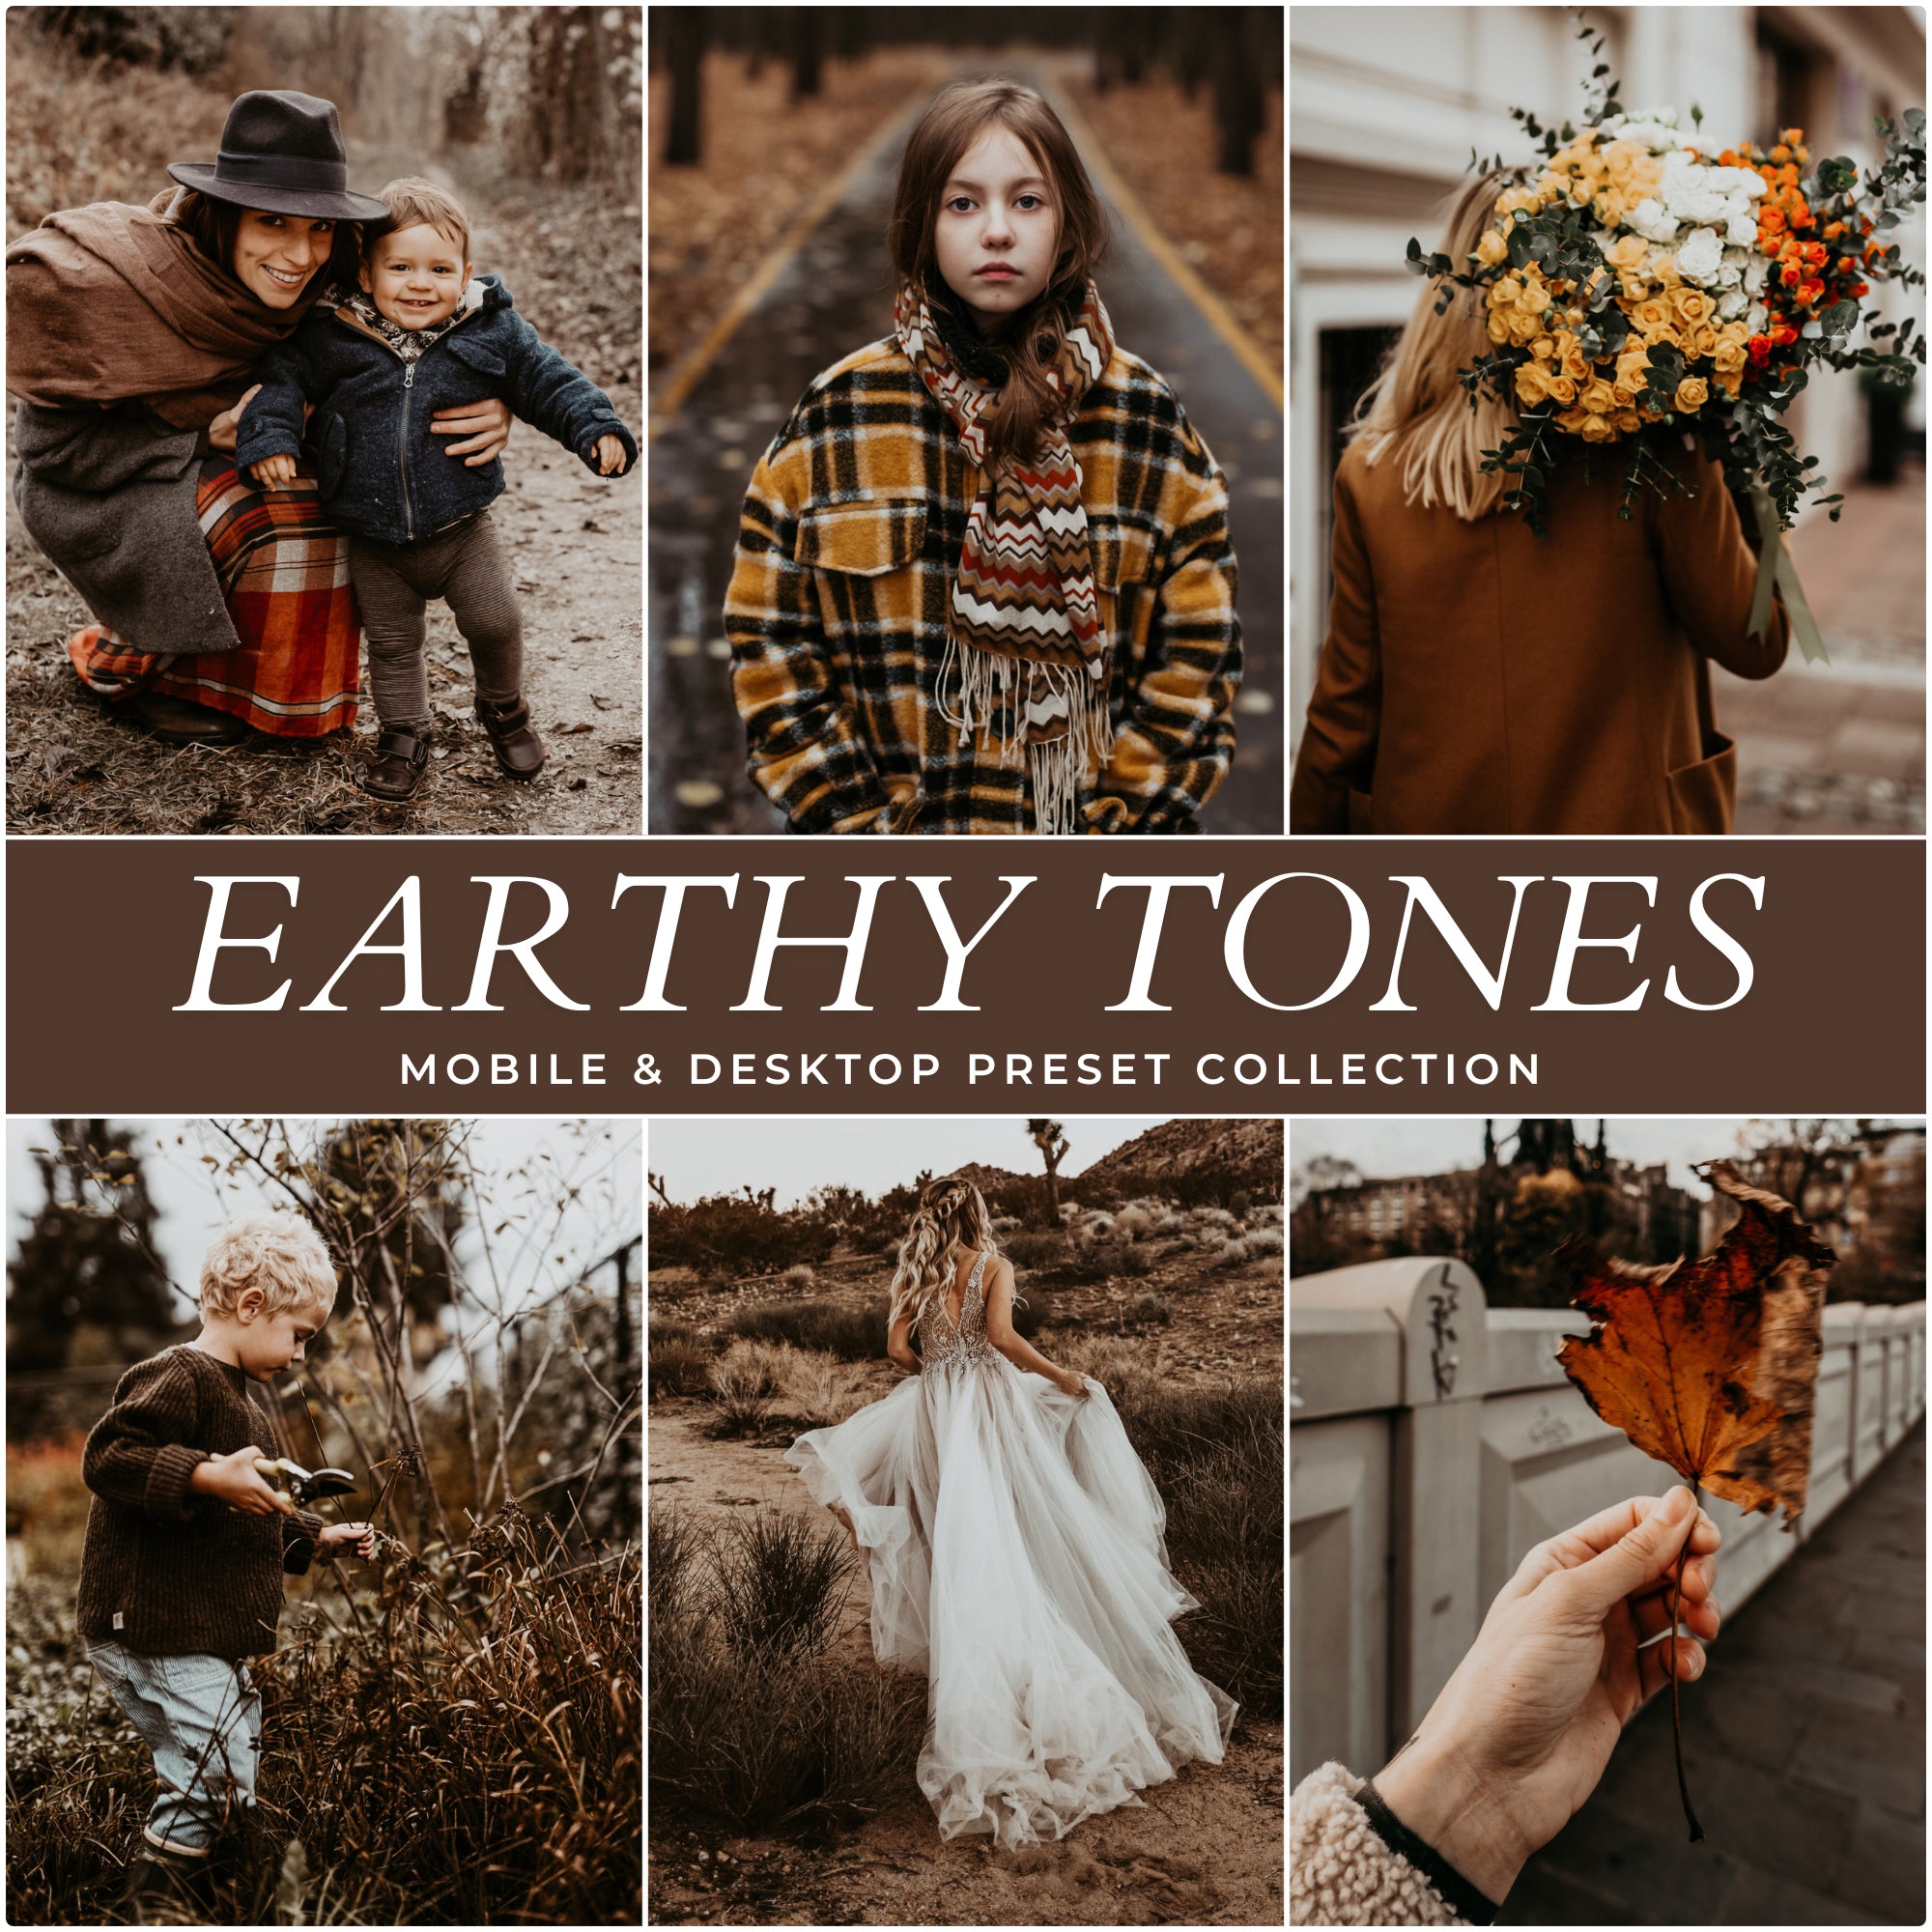 Earthy Tones Lightroom Presets For Photographers and Instagram Influencers Photo Editing In Adobe Lightroom By Lou And Marks Presets